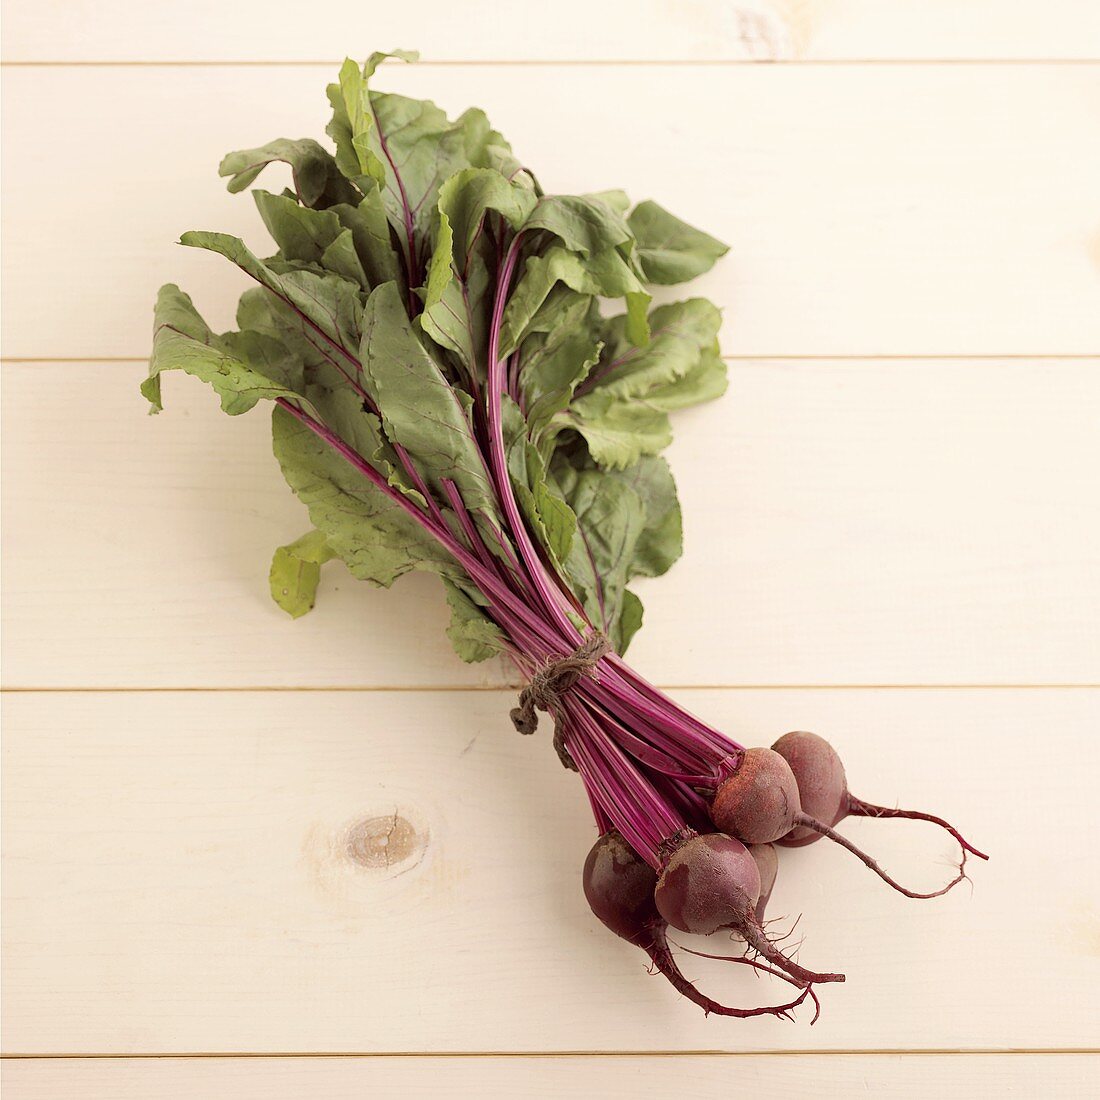 Beetroot with leaves, in a bunch